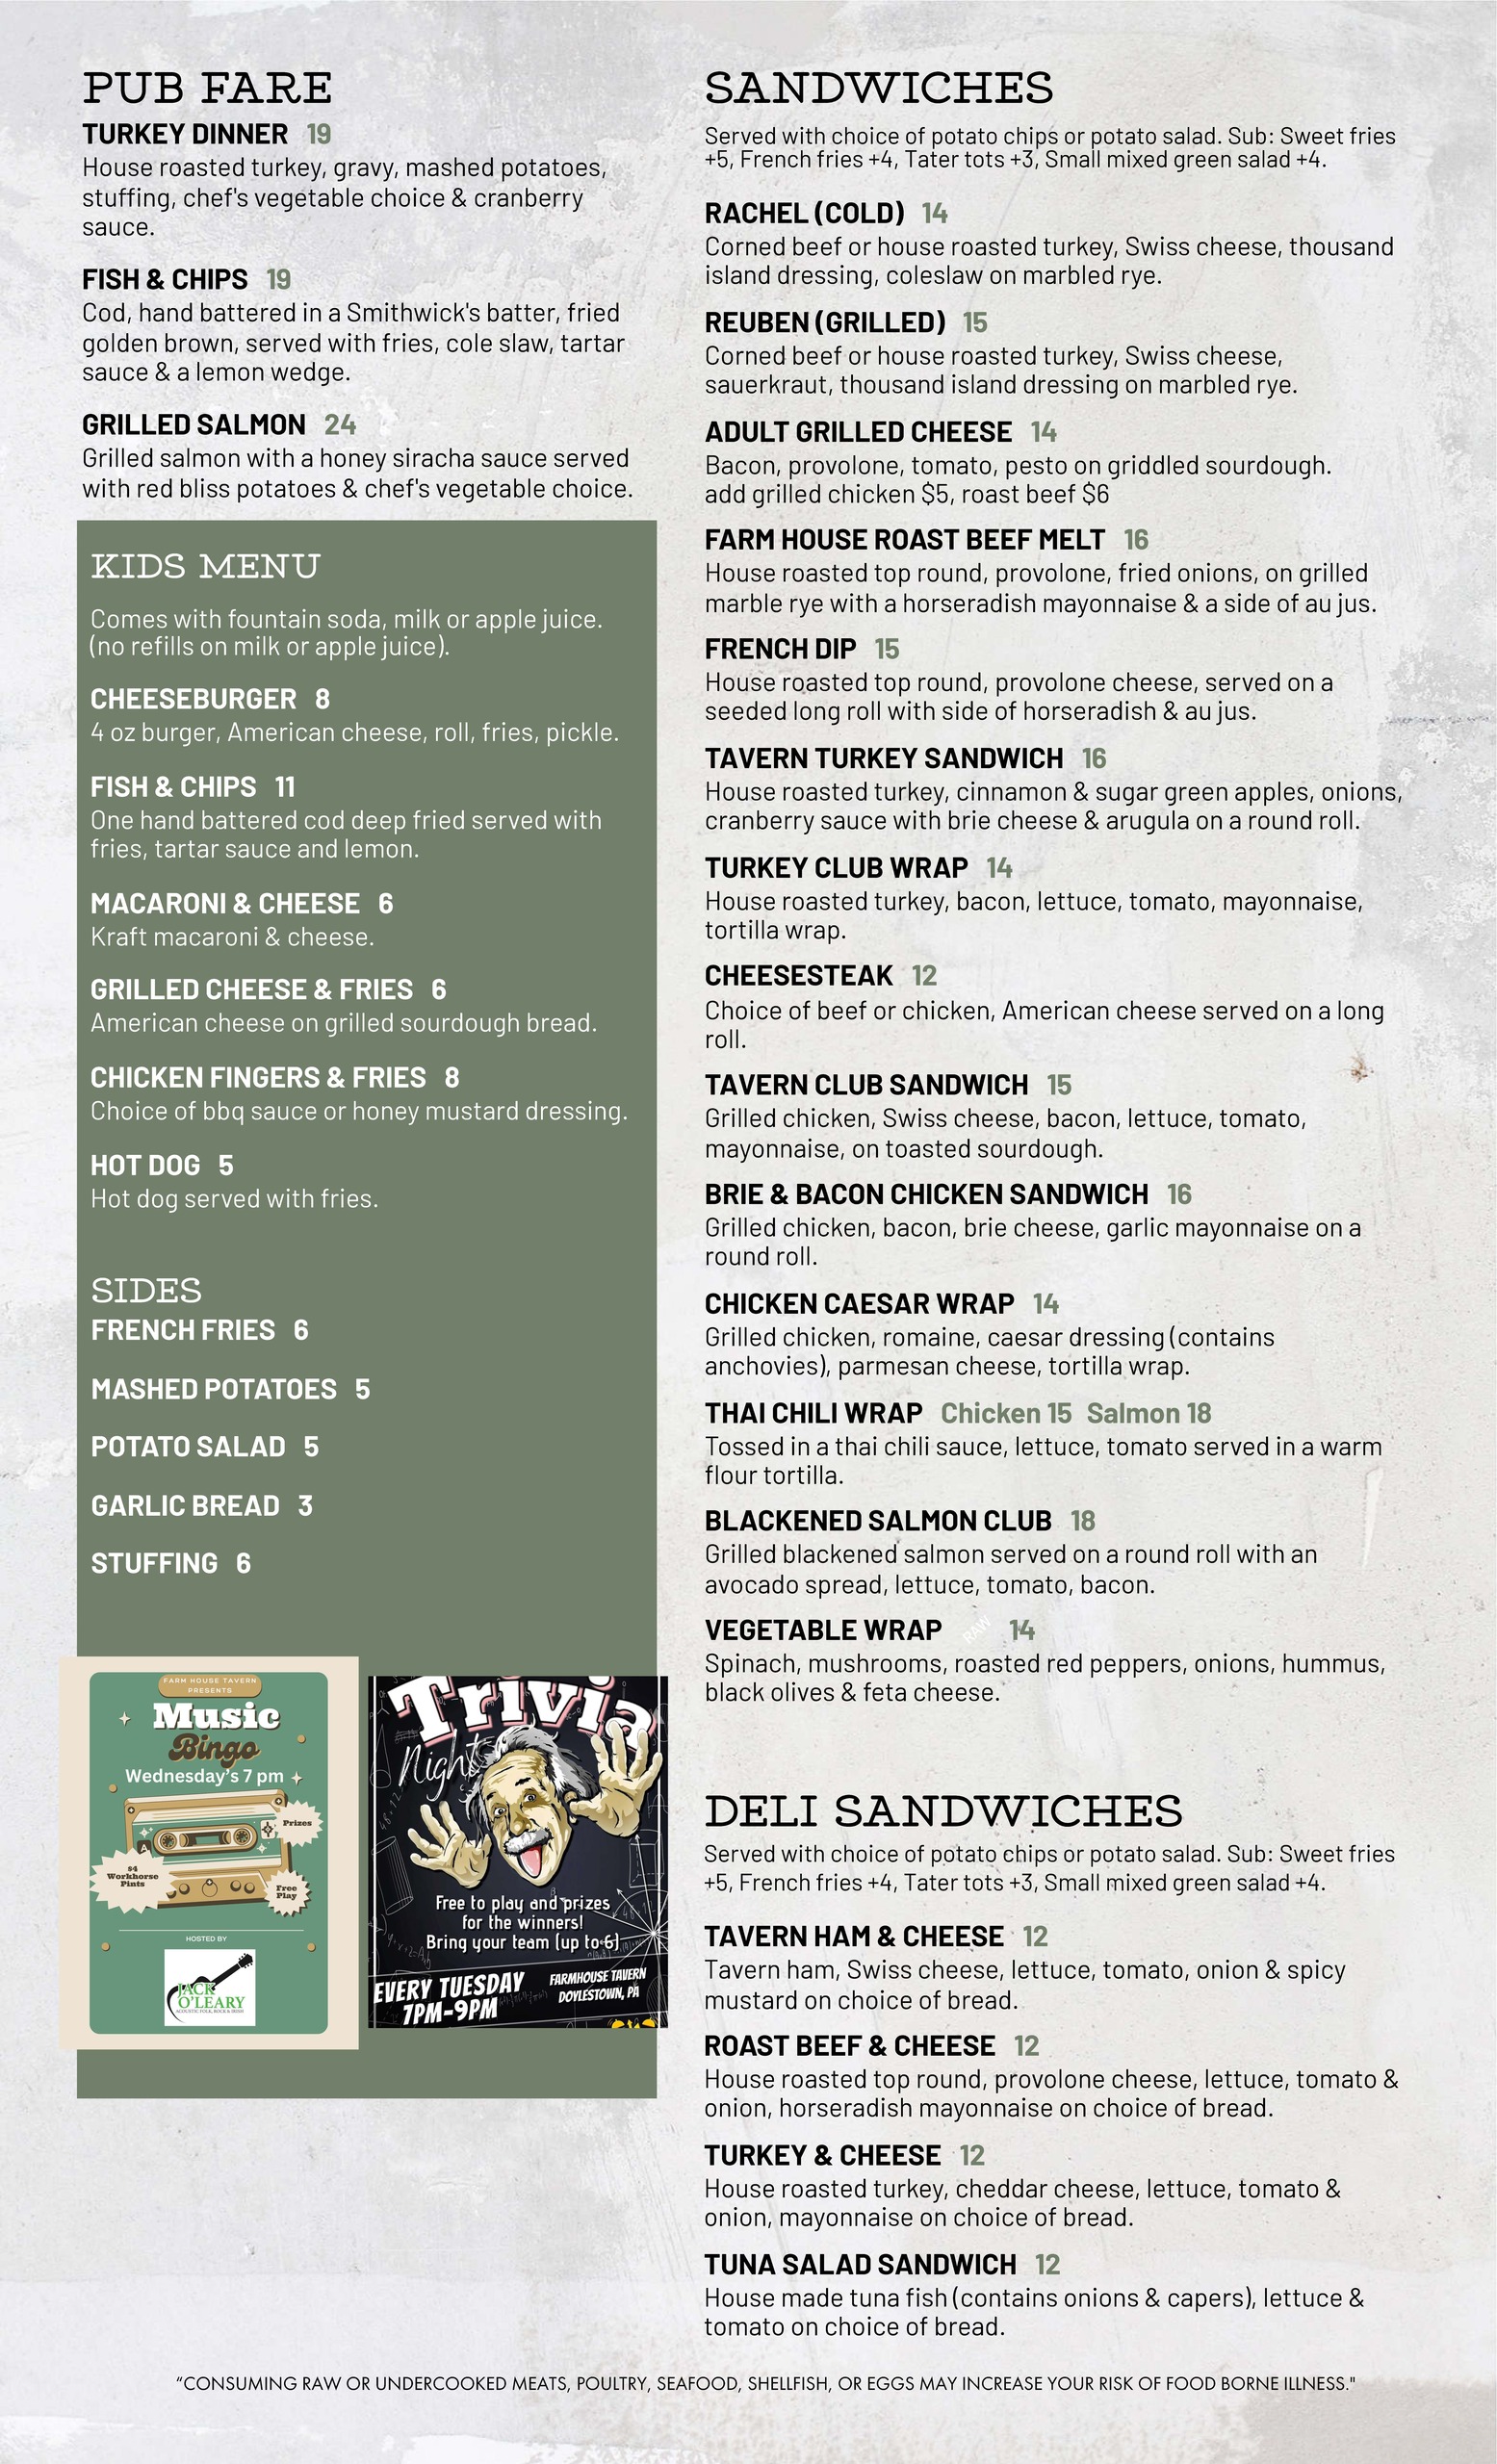 A detailed menu featuring "Pub Fare," "Sandwiches," "Kids Menu," "Sides," and "Deli Sandwiches" sections. Items include turkey dinner, fish & chips, cheeseburger, various sandwiches, and soups.